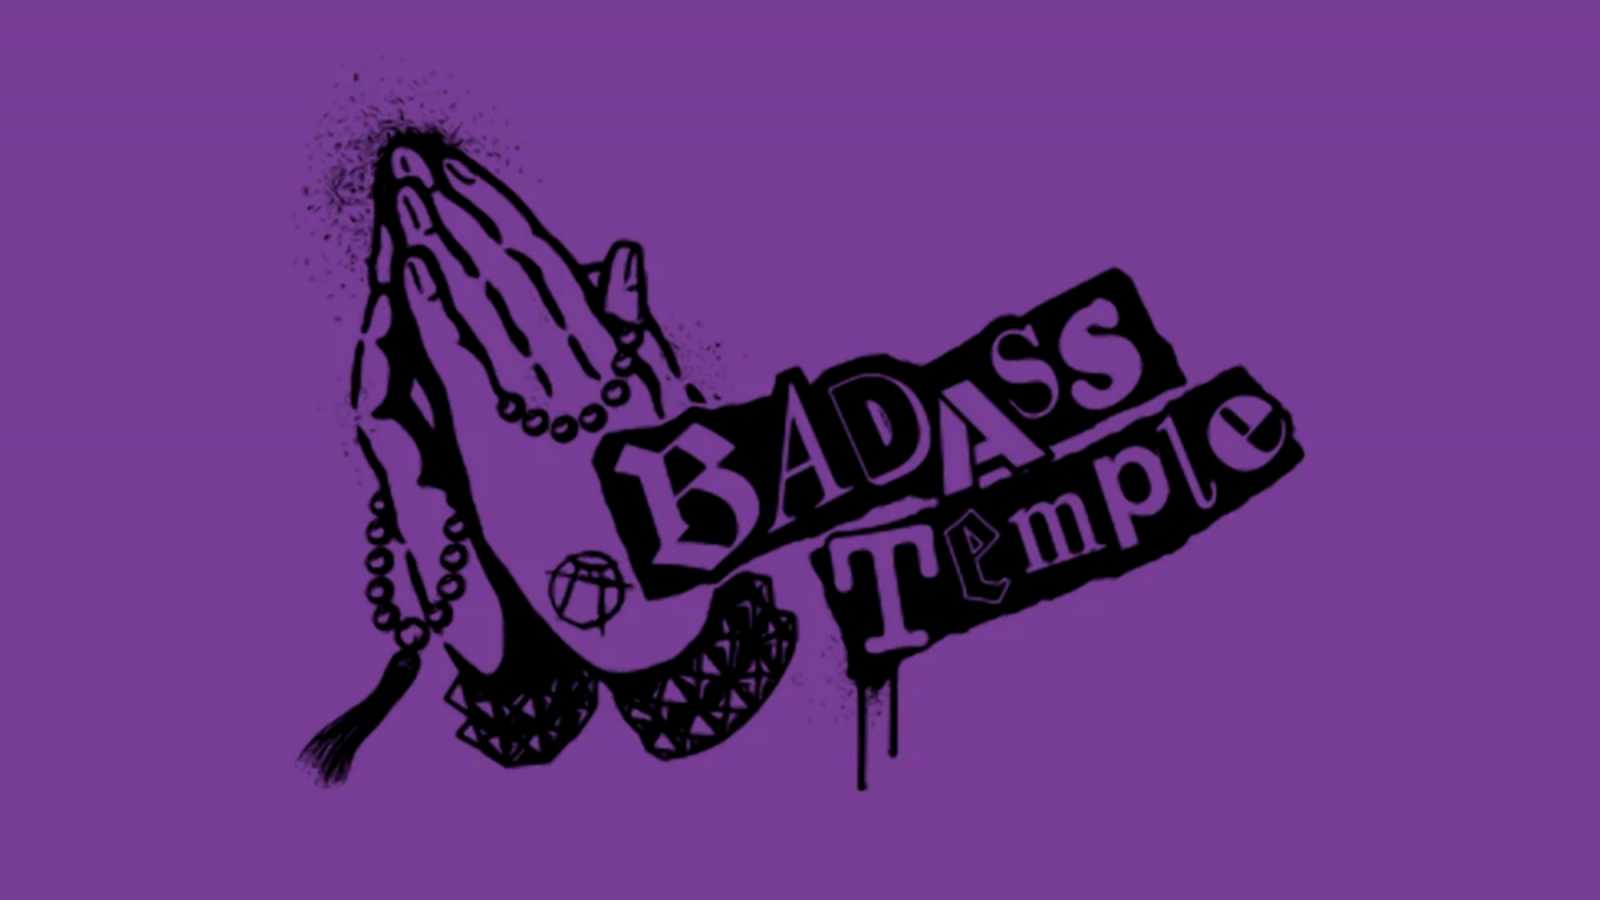 Bad Ass Temple © EVIL LINE RECORDS. All rights reserved.